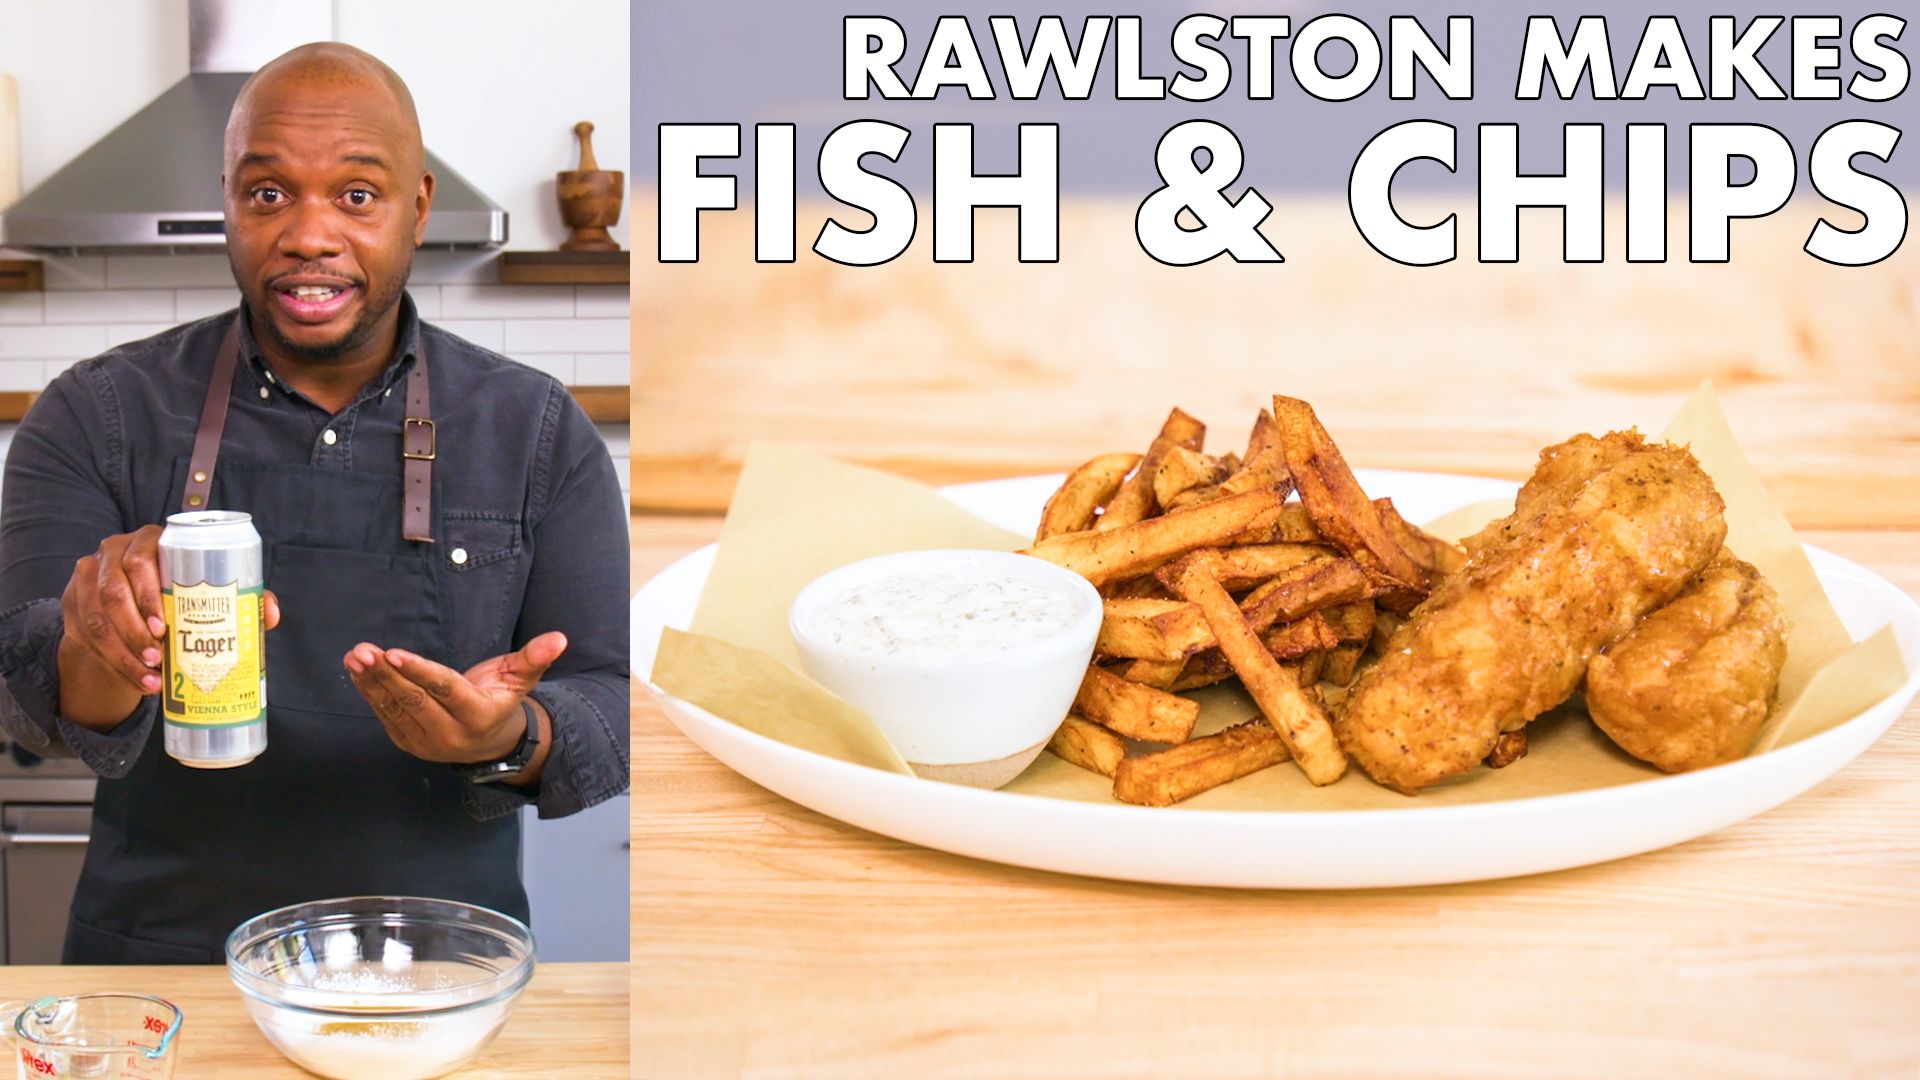 Watch Rawlston Makes Fish And Chips, From the Home Kitchen